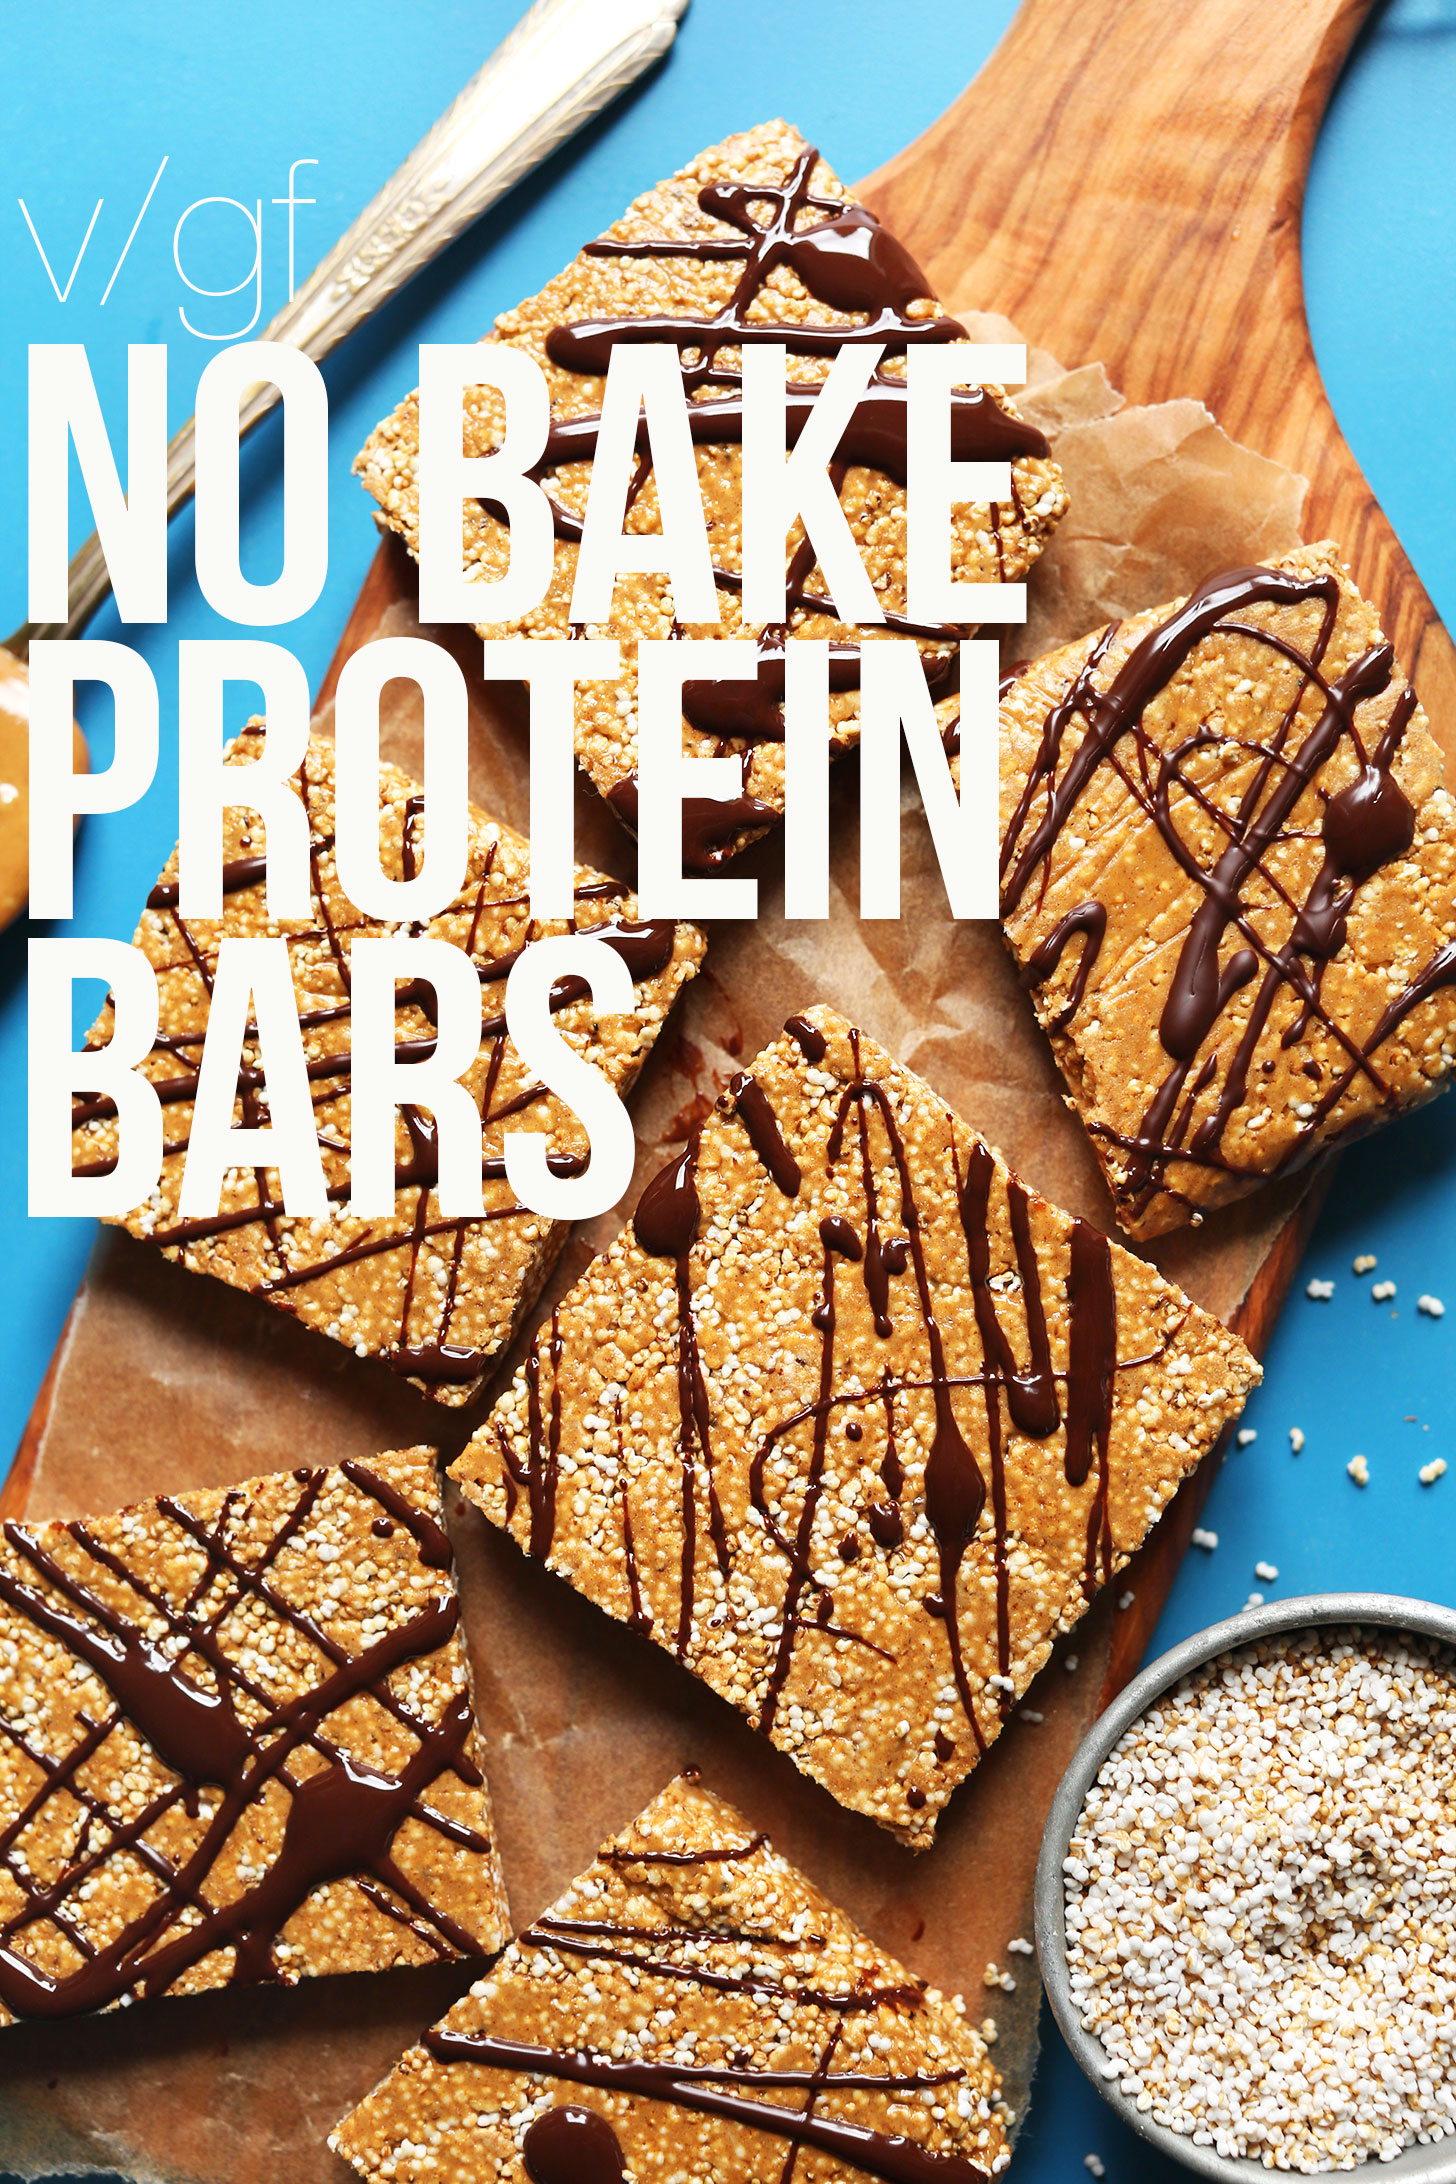 Squares of our No Bake Vegan Protein Bars recipe for a protein-rich vegan snack